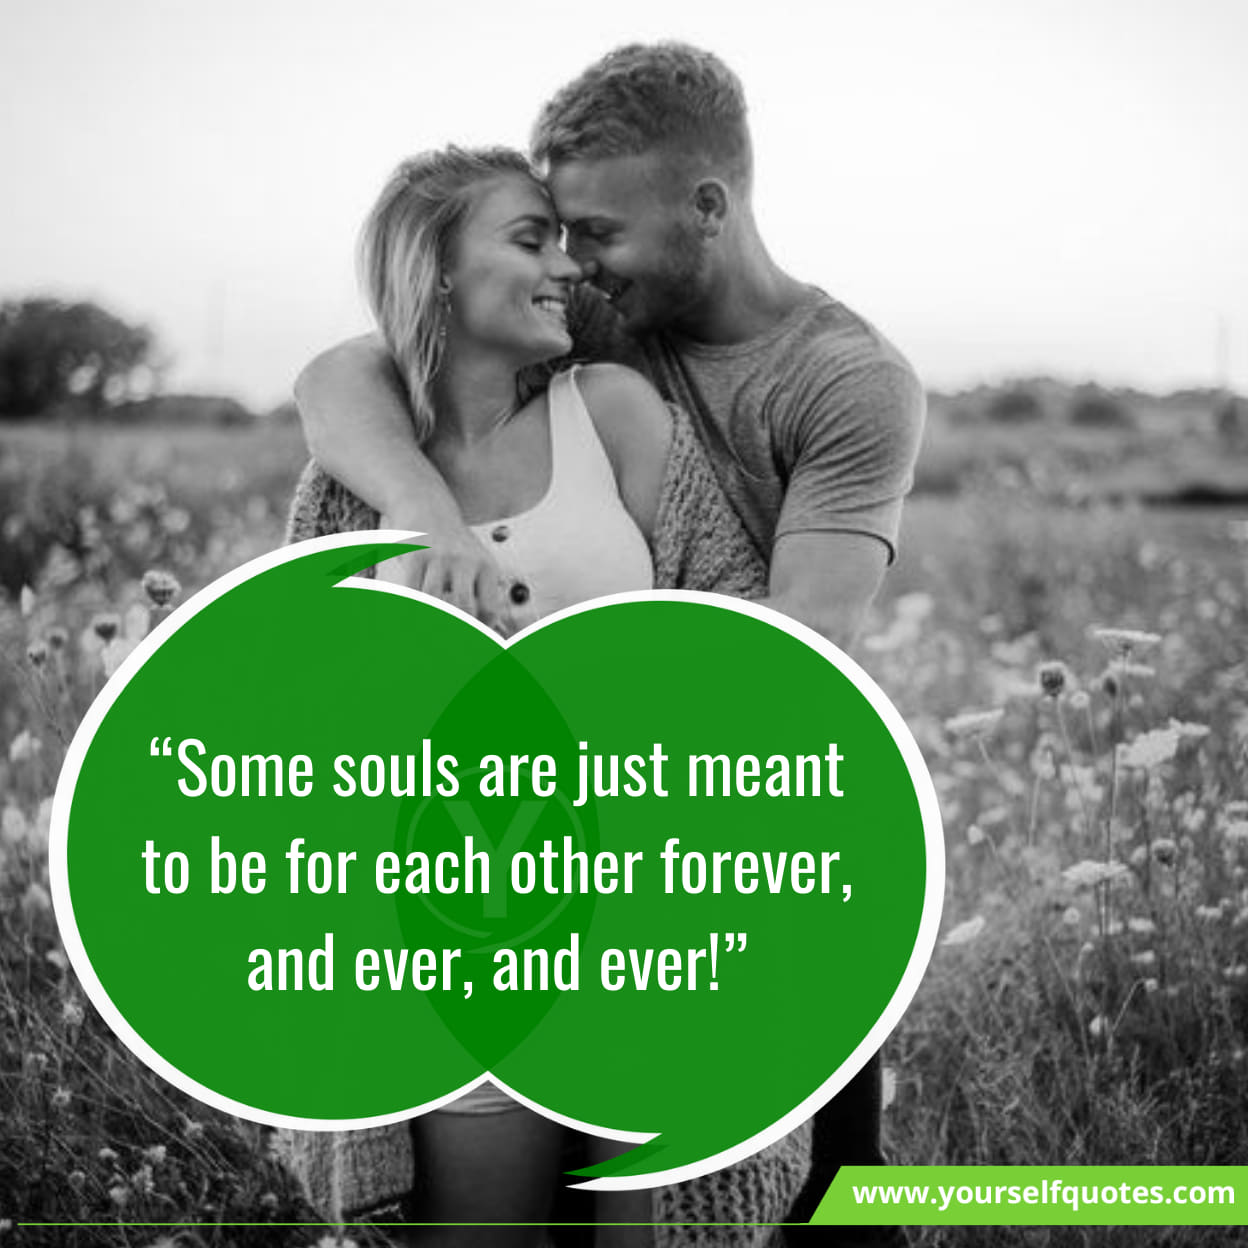 Soulmate Quotes for Her